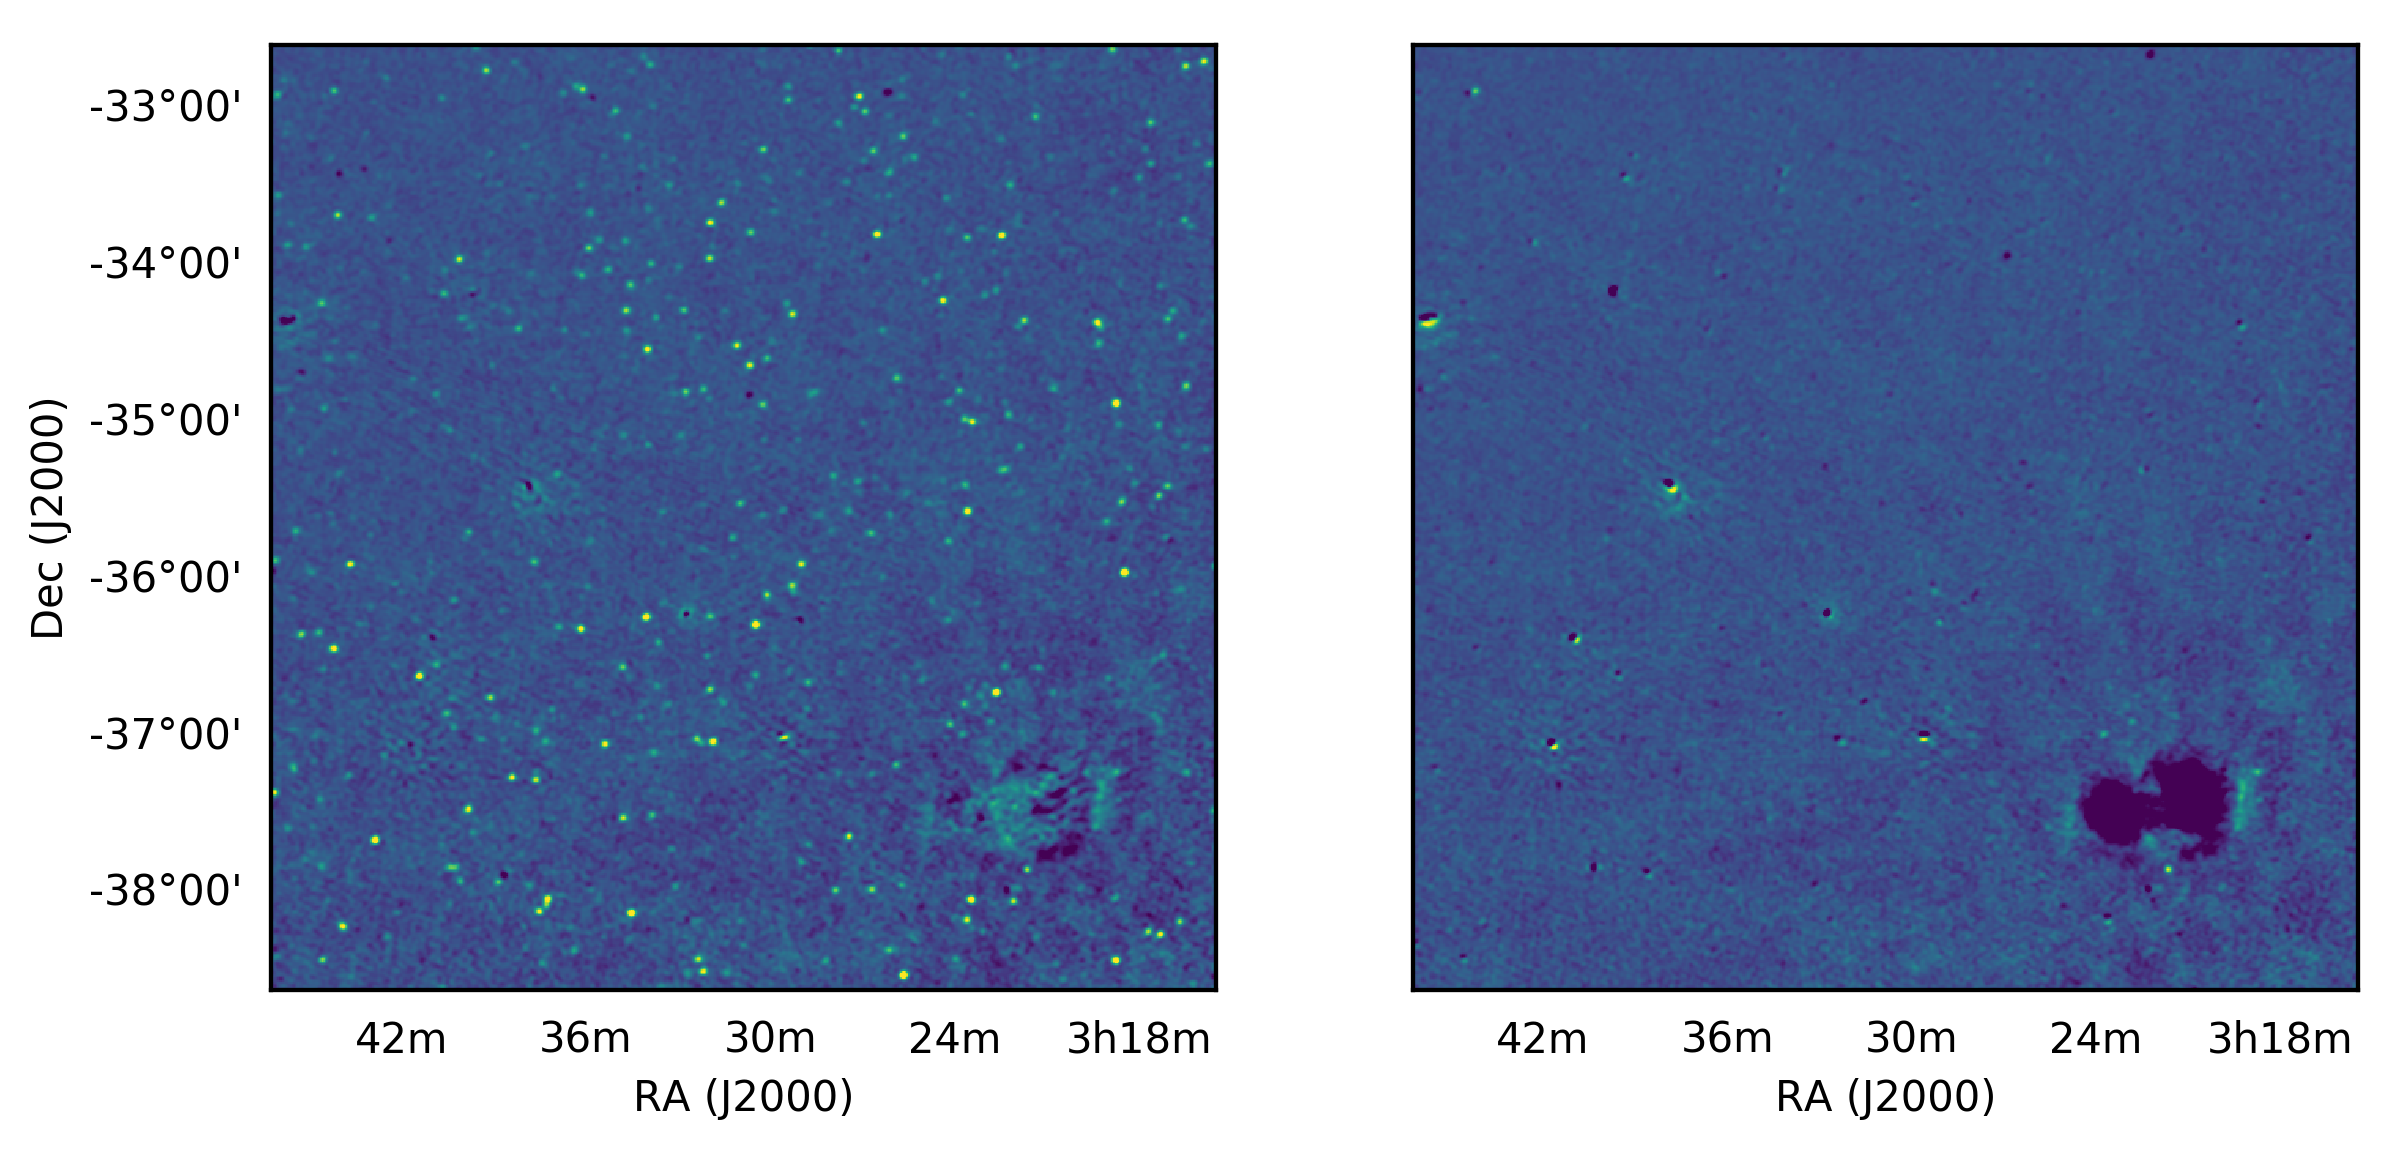 Left column: MWA image. Right column: MWA image after the brightest 1000 sources have been “peeled” away, leaving many more dimmer sources behind.